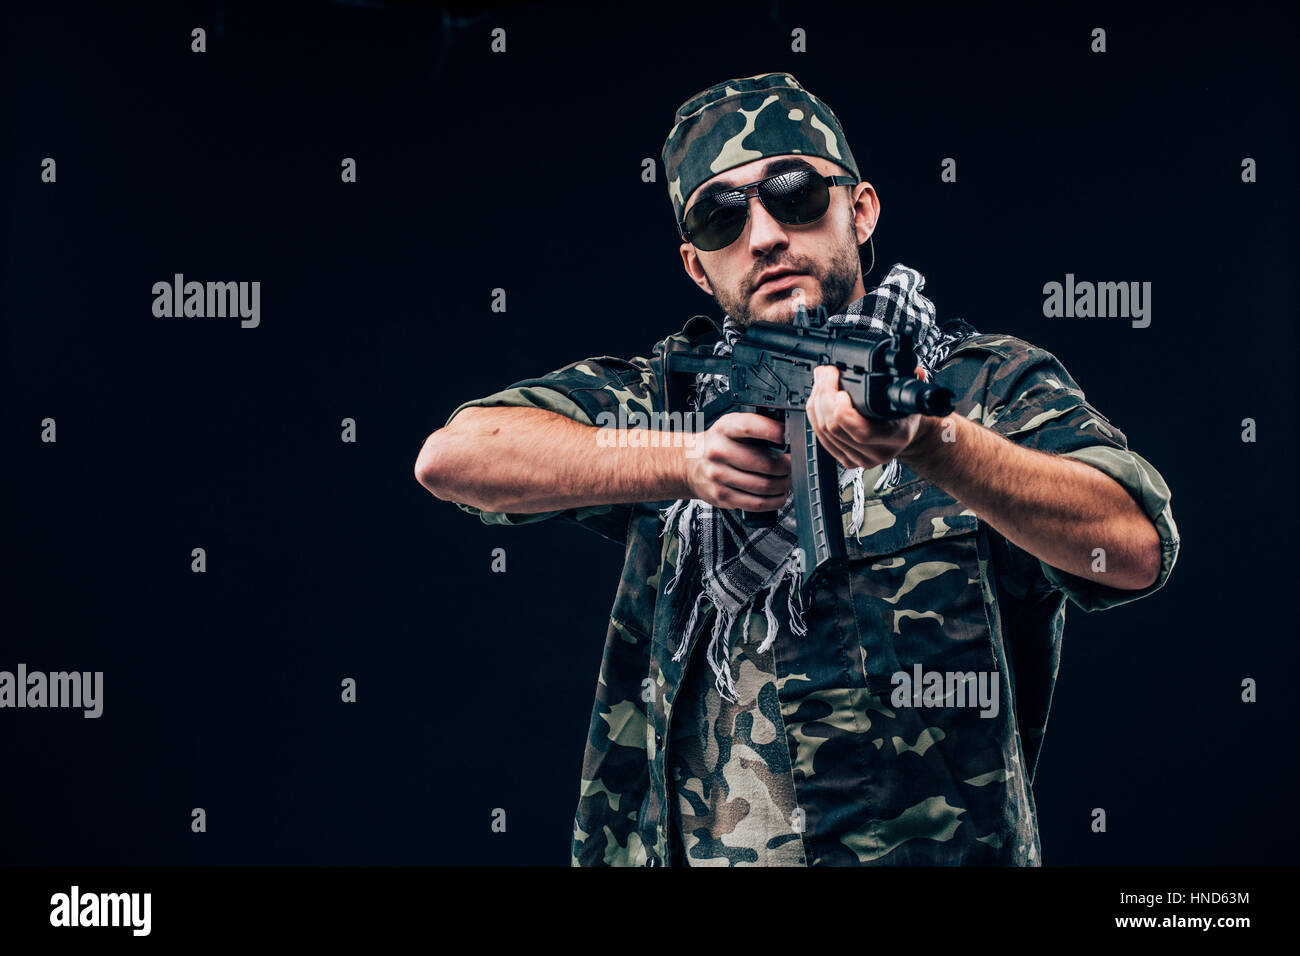 Terrorist sniper shooting with his weapon. Concept about terrorism Stock Photo